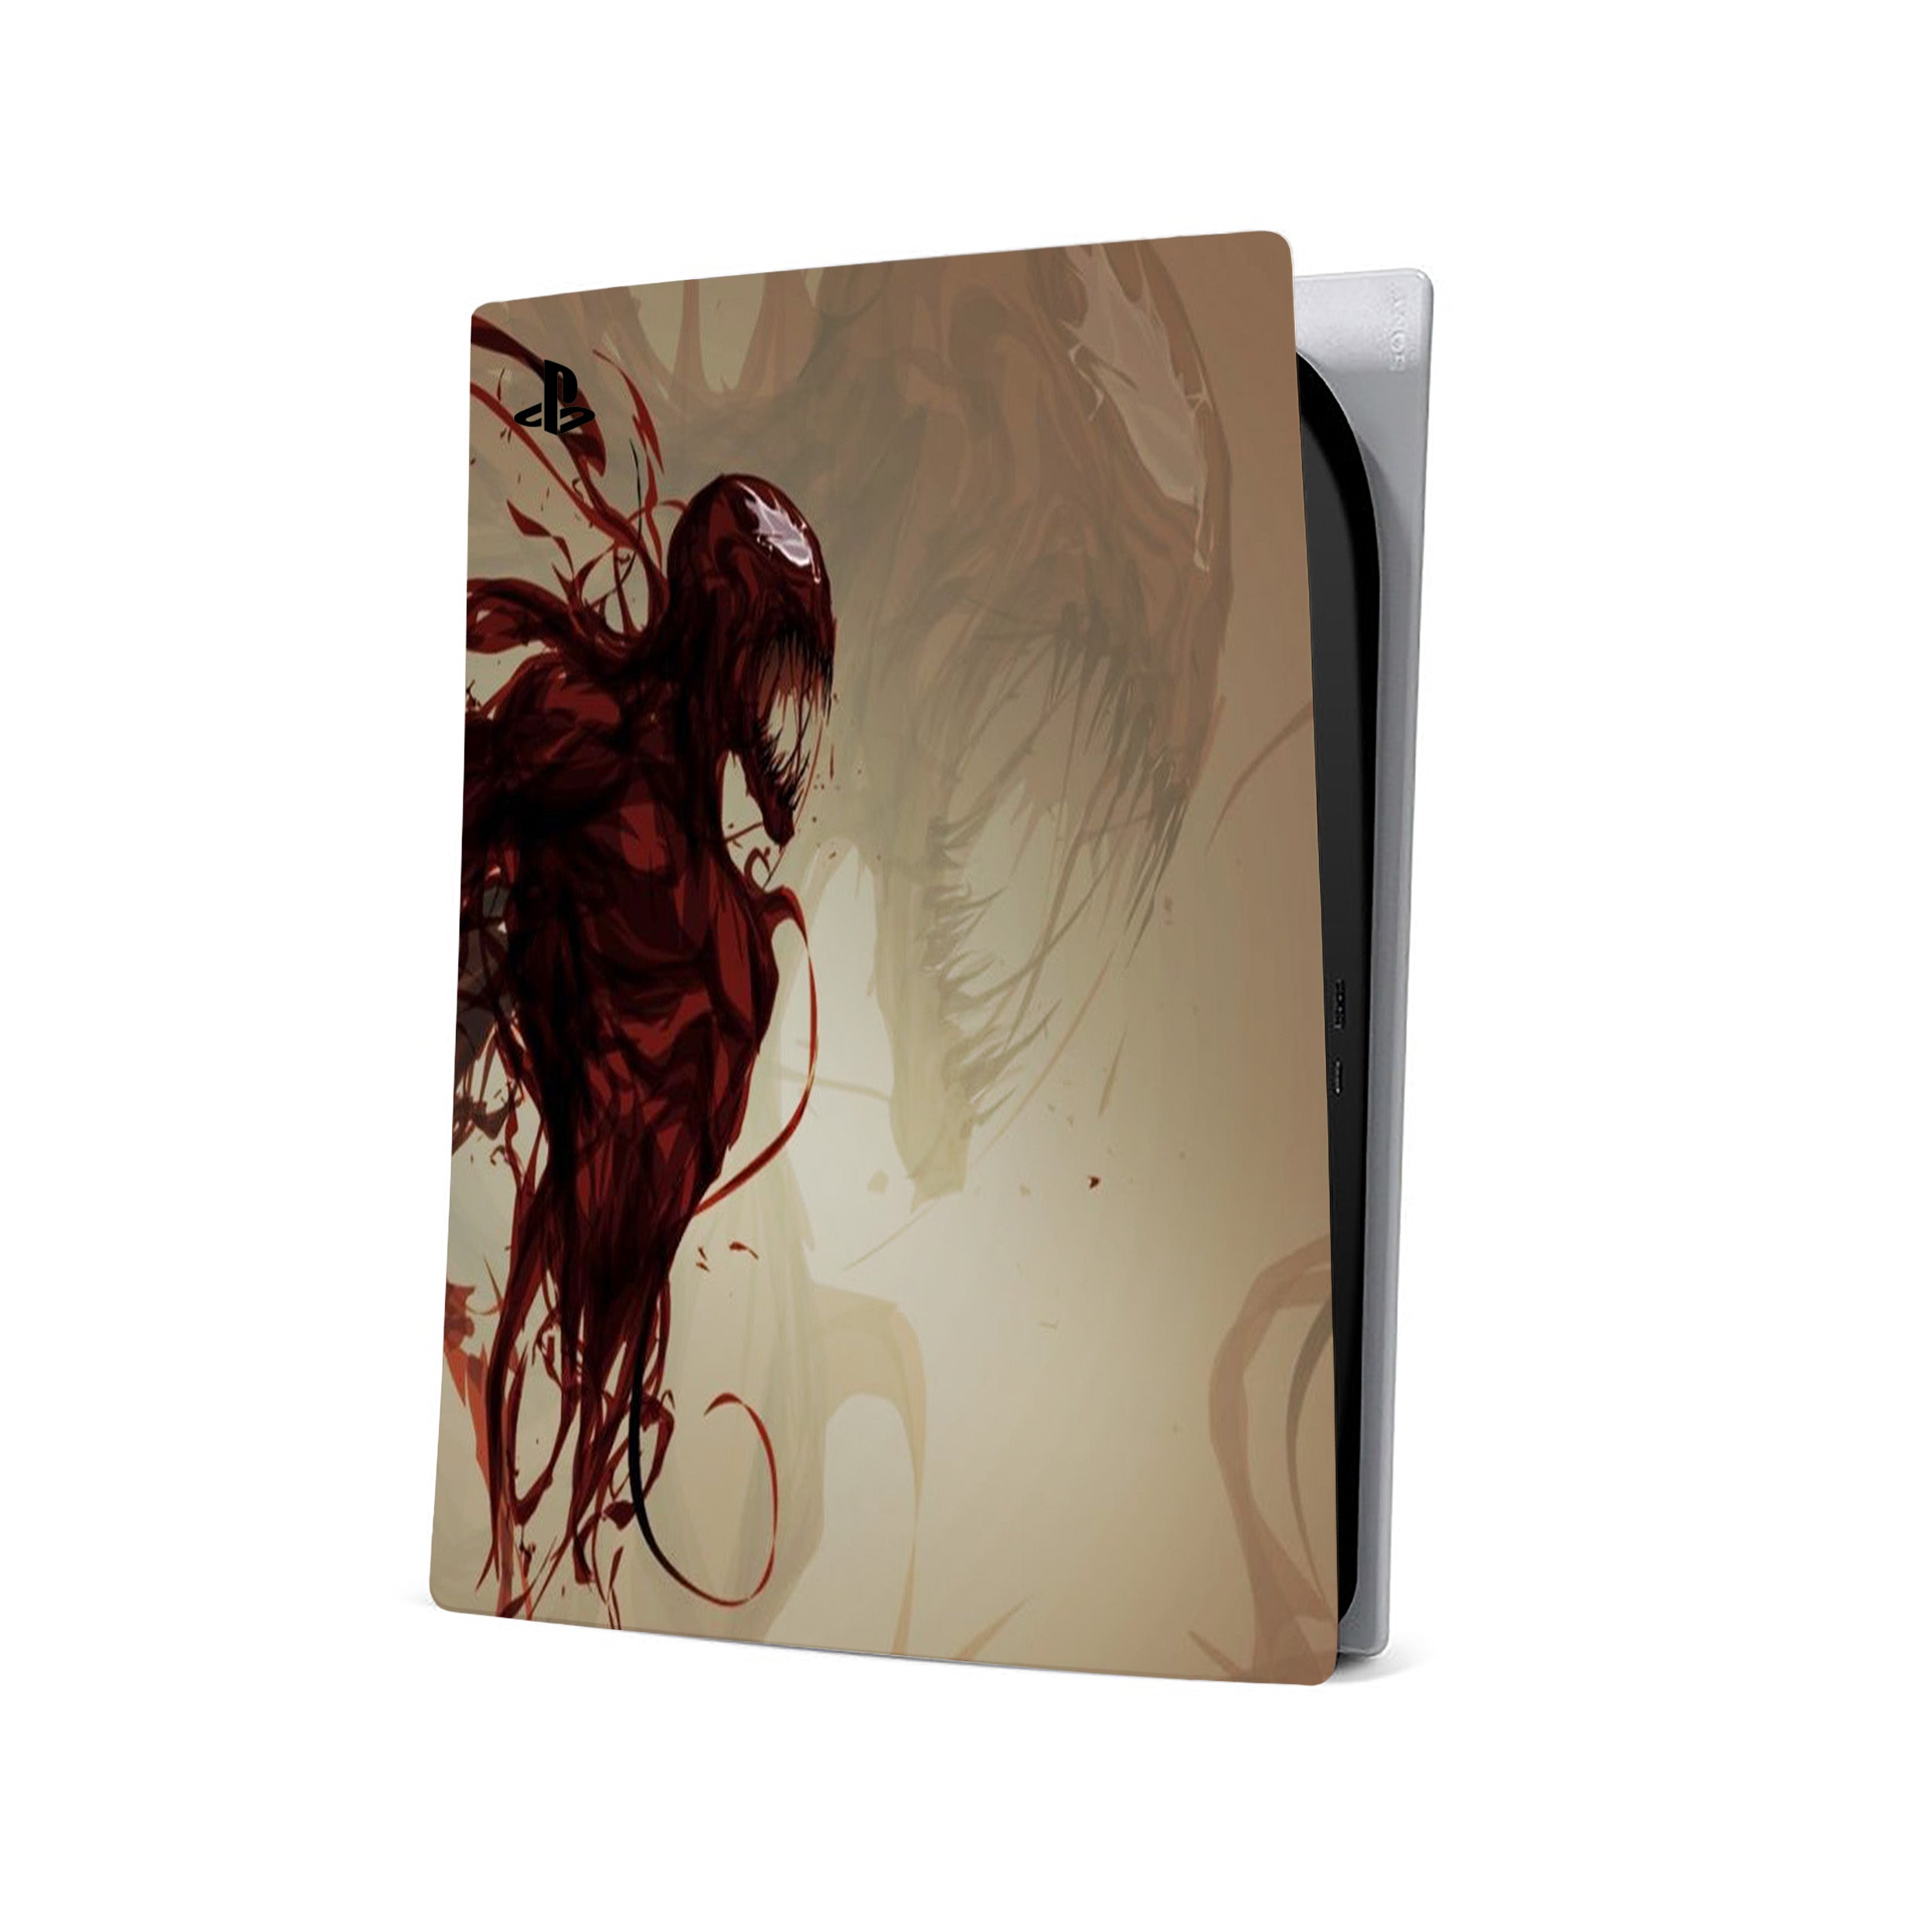 A video game skin featuring a Marvel Carnage design for the PS5.